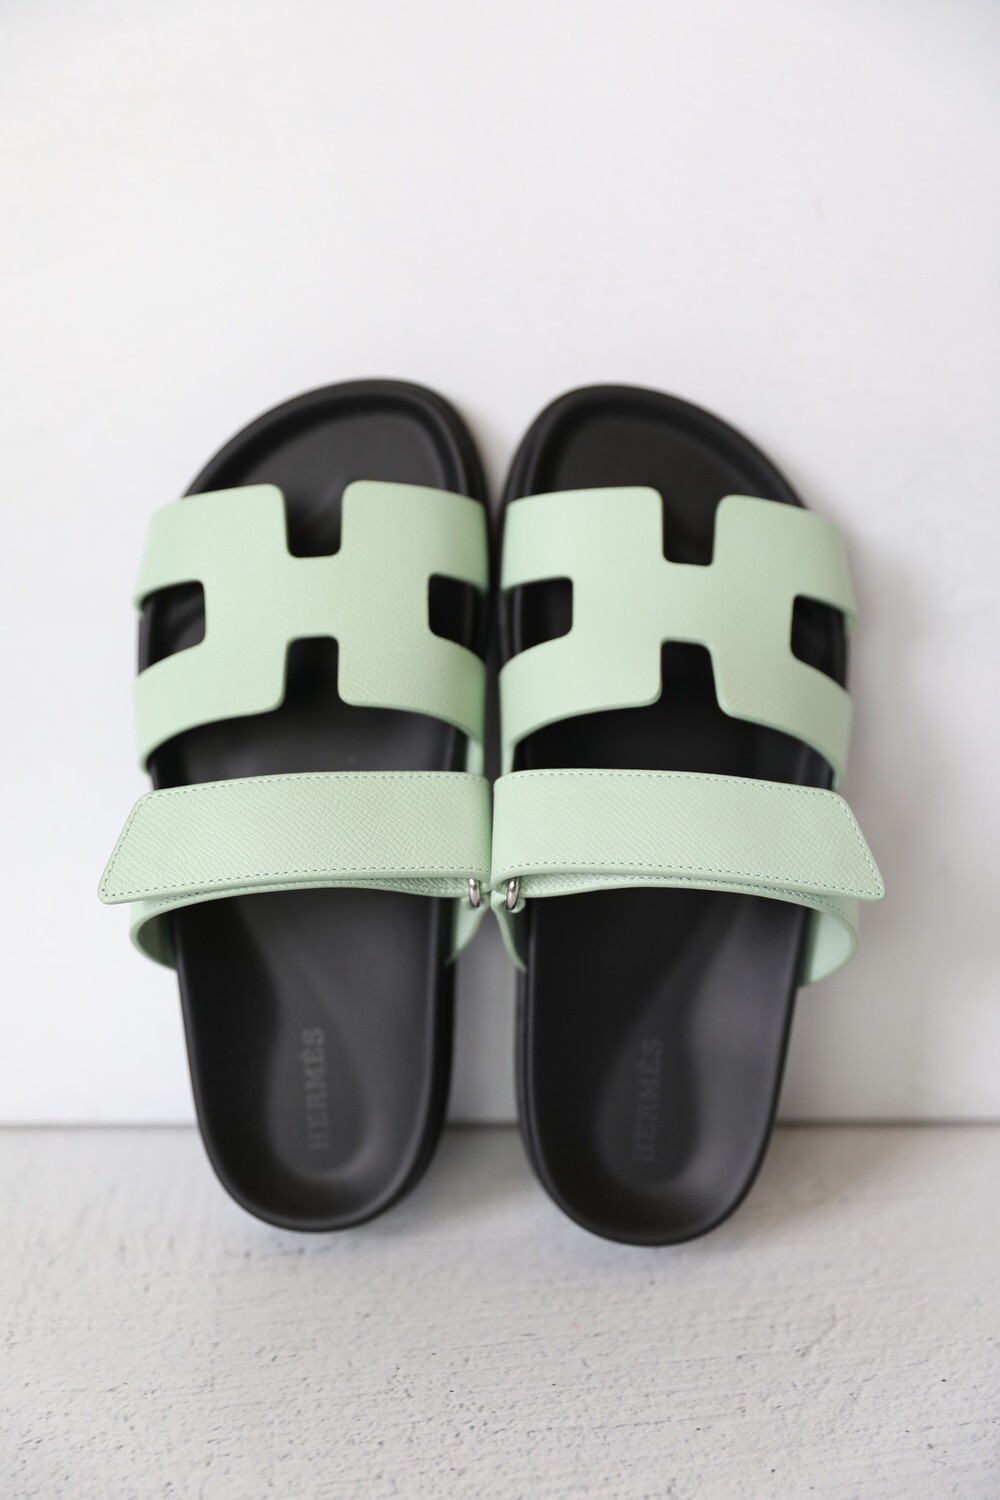 Hermes Chypre Sandals, Green, Size 37.5, New in Box WA001